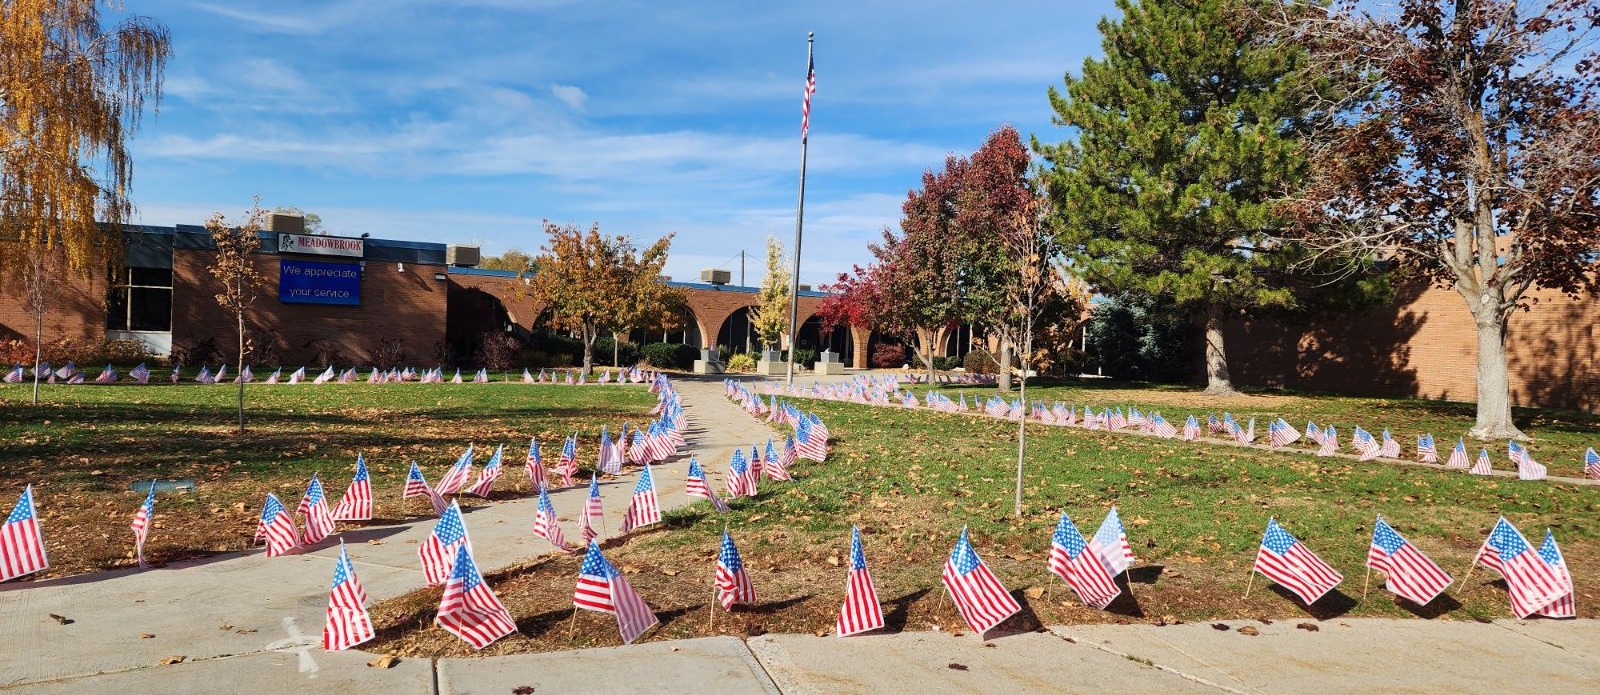 Flags line the pathway to the school